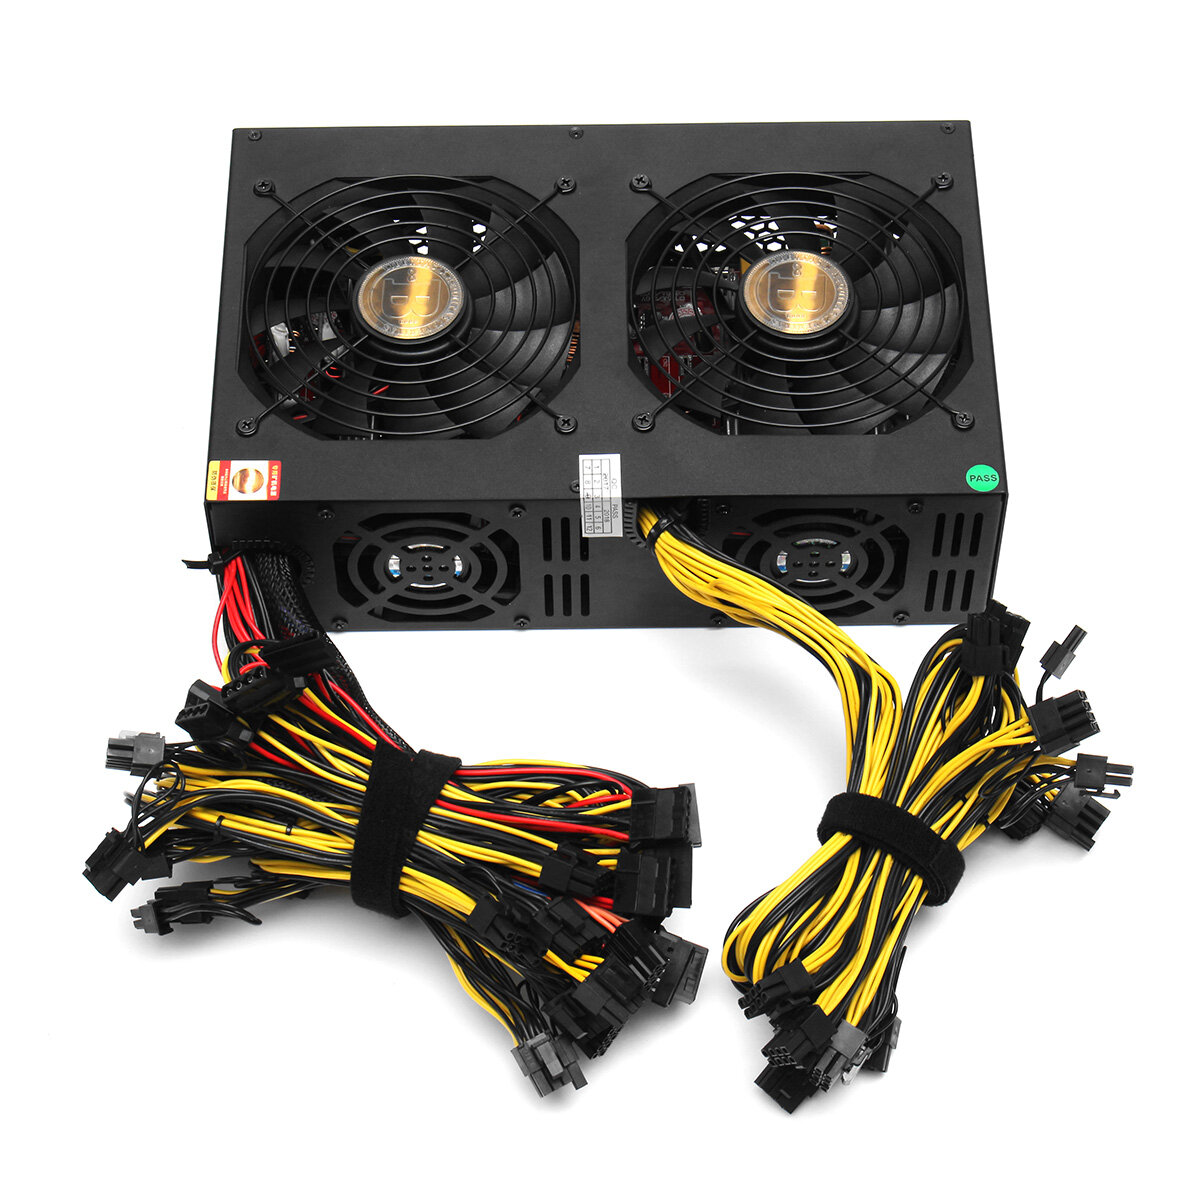 Image of 3450W Miner Power Supply 140mm Cooling Fan ATX 12V Version 231 Computer Power Supply Mining for BTC Bitcoin Mining Serv